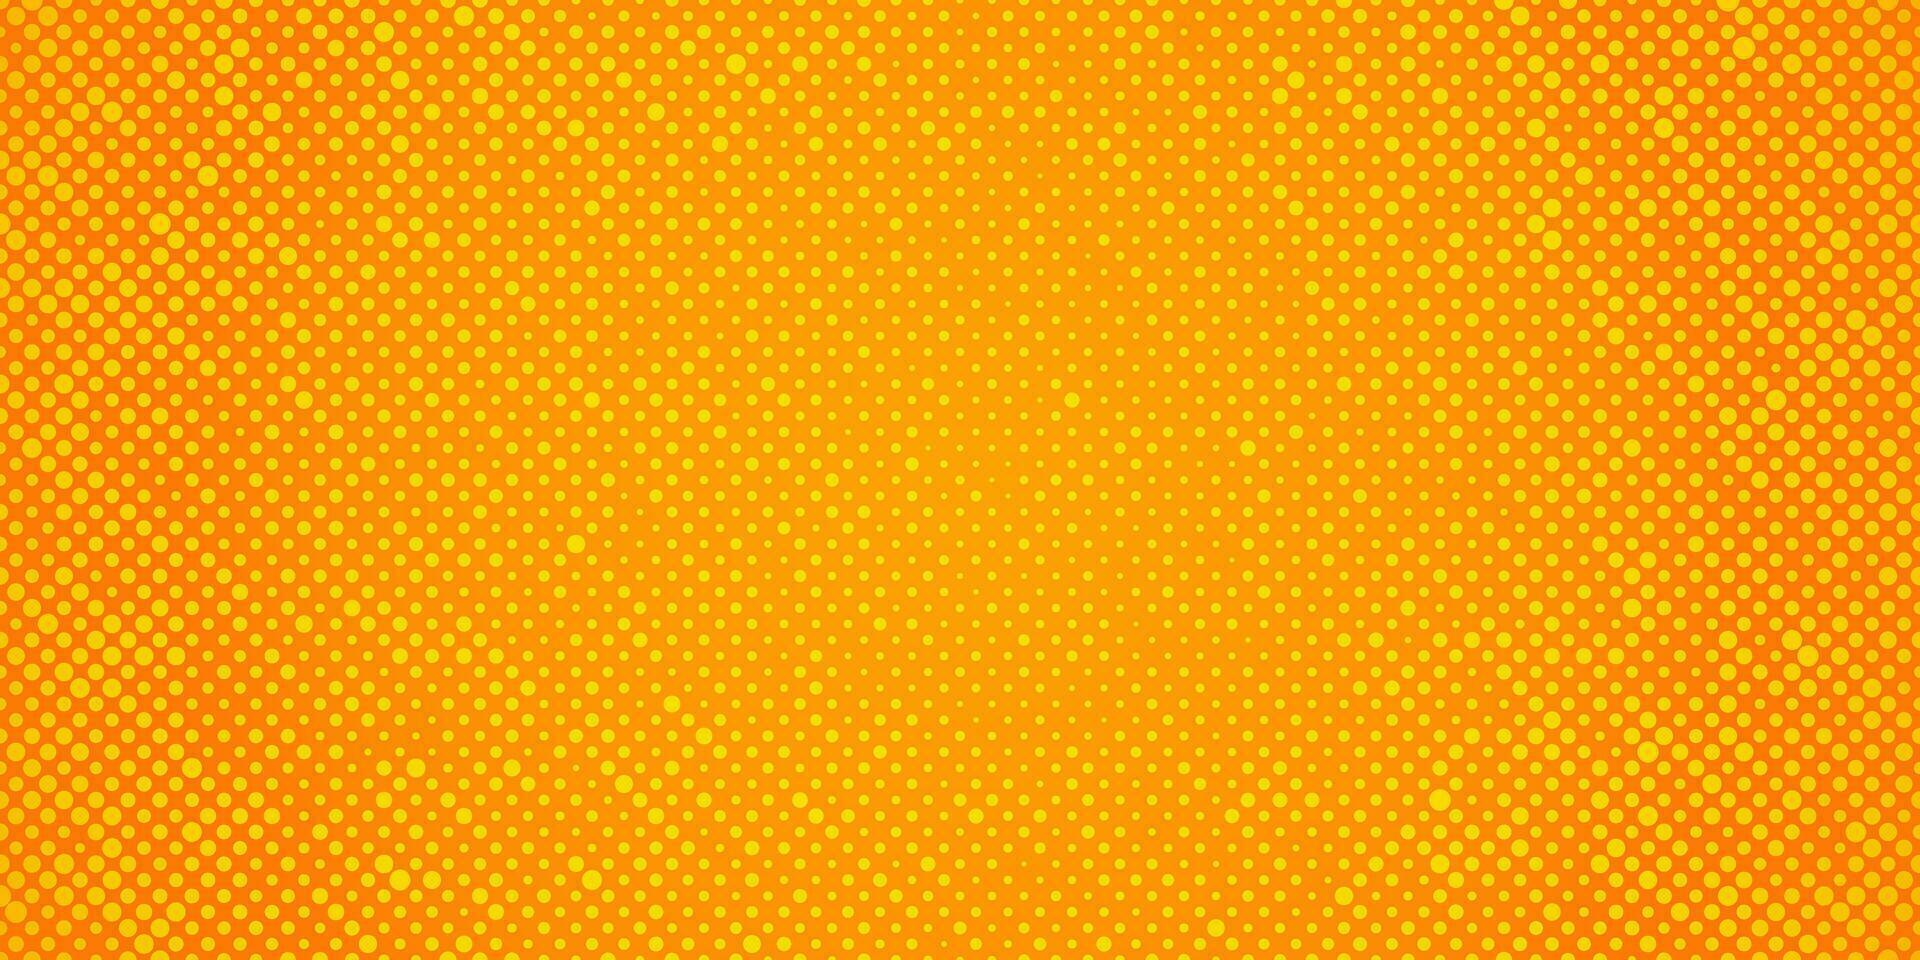 Colorful Hand drawn dots abstract background vector